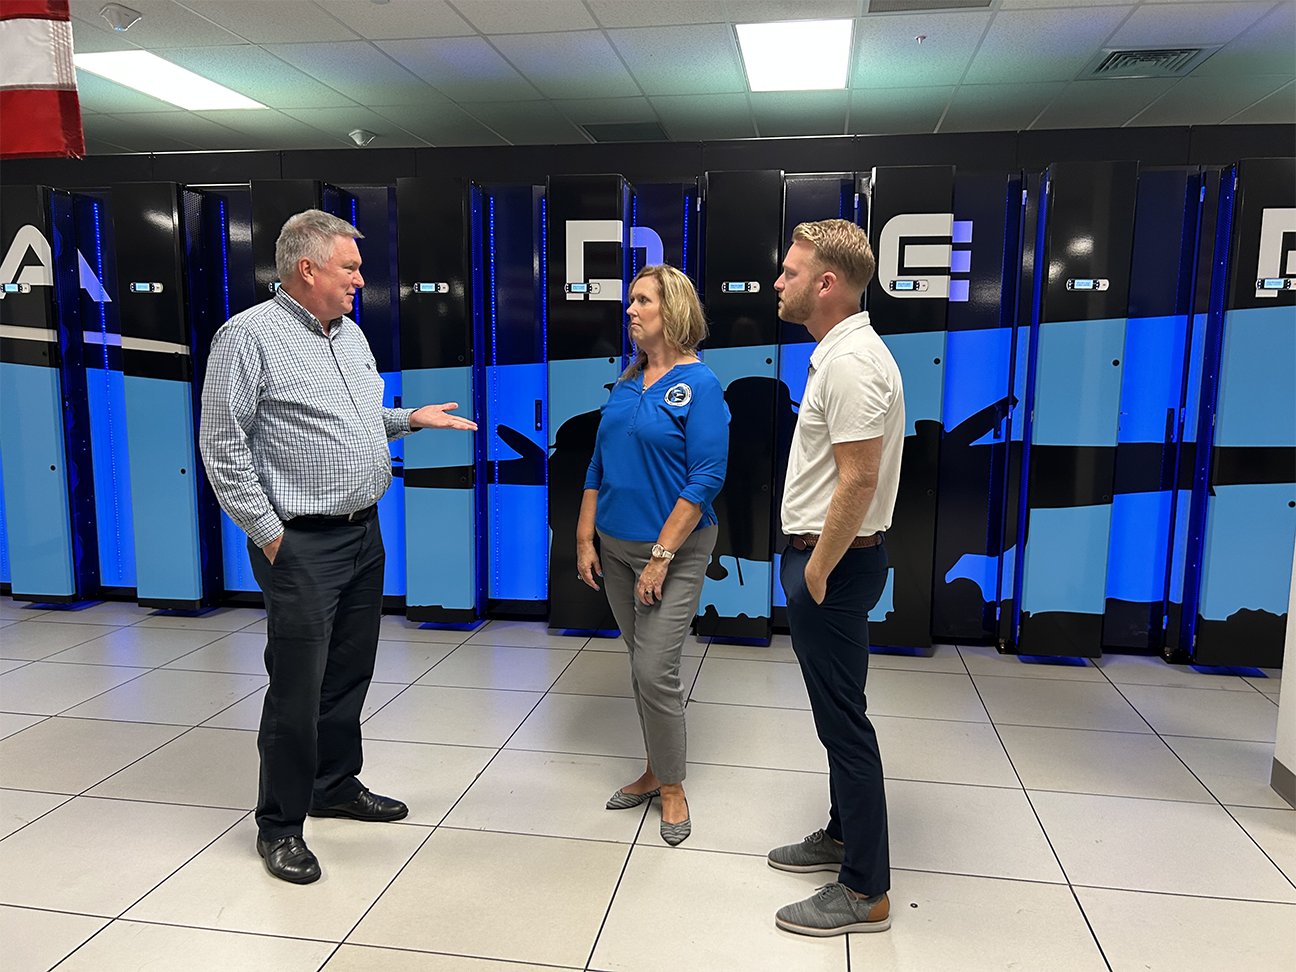 leadership in discussions of supercomputer